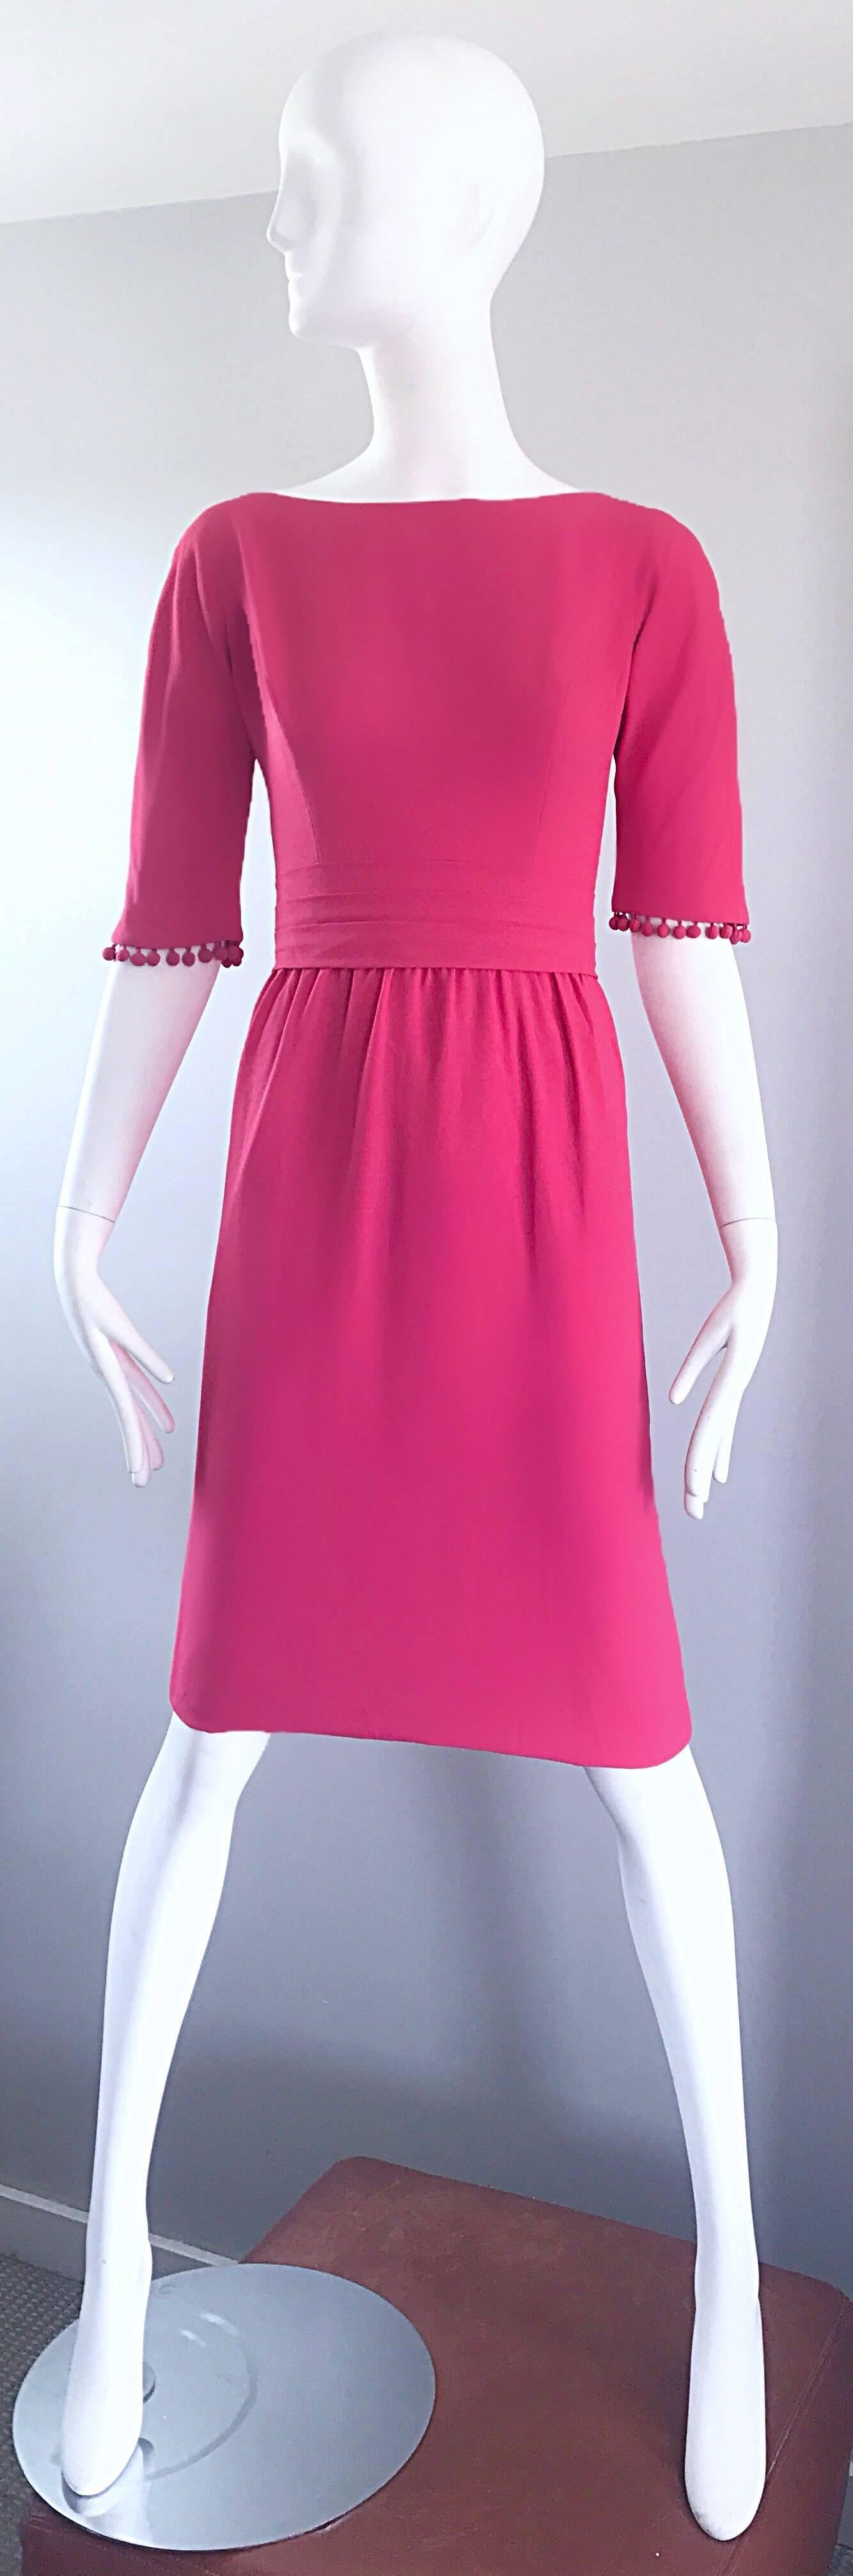 Beautiful 1950s demi couture raspberry pink crepe dress! Features pom pom balls attached at the cuffs of each sleeve. Pom poms also featured on the train on the back. Full metal zipper up the back with hook-and-eye closure. Most of the construction